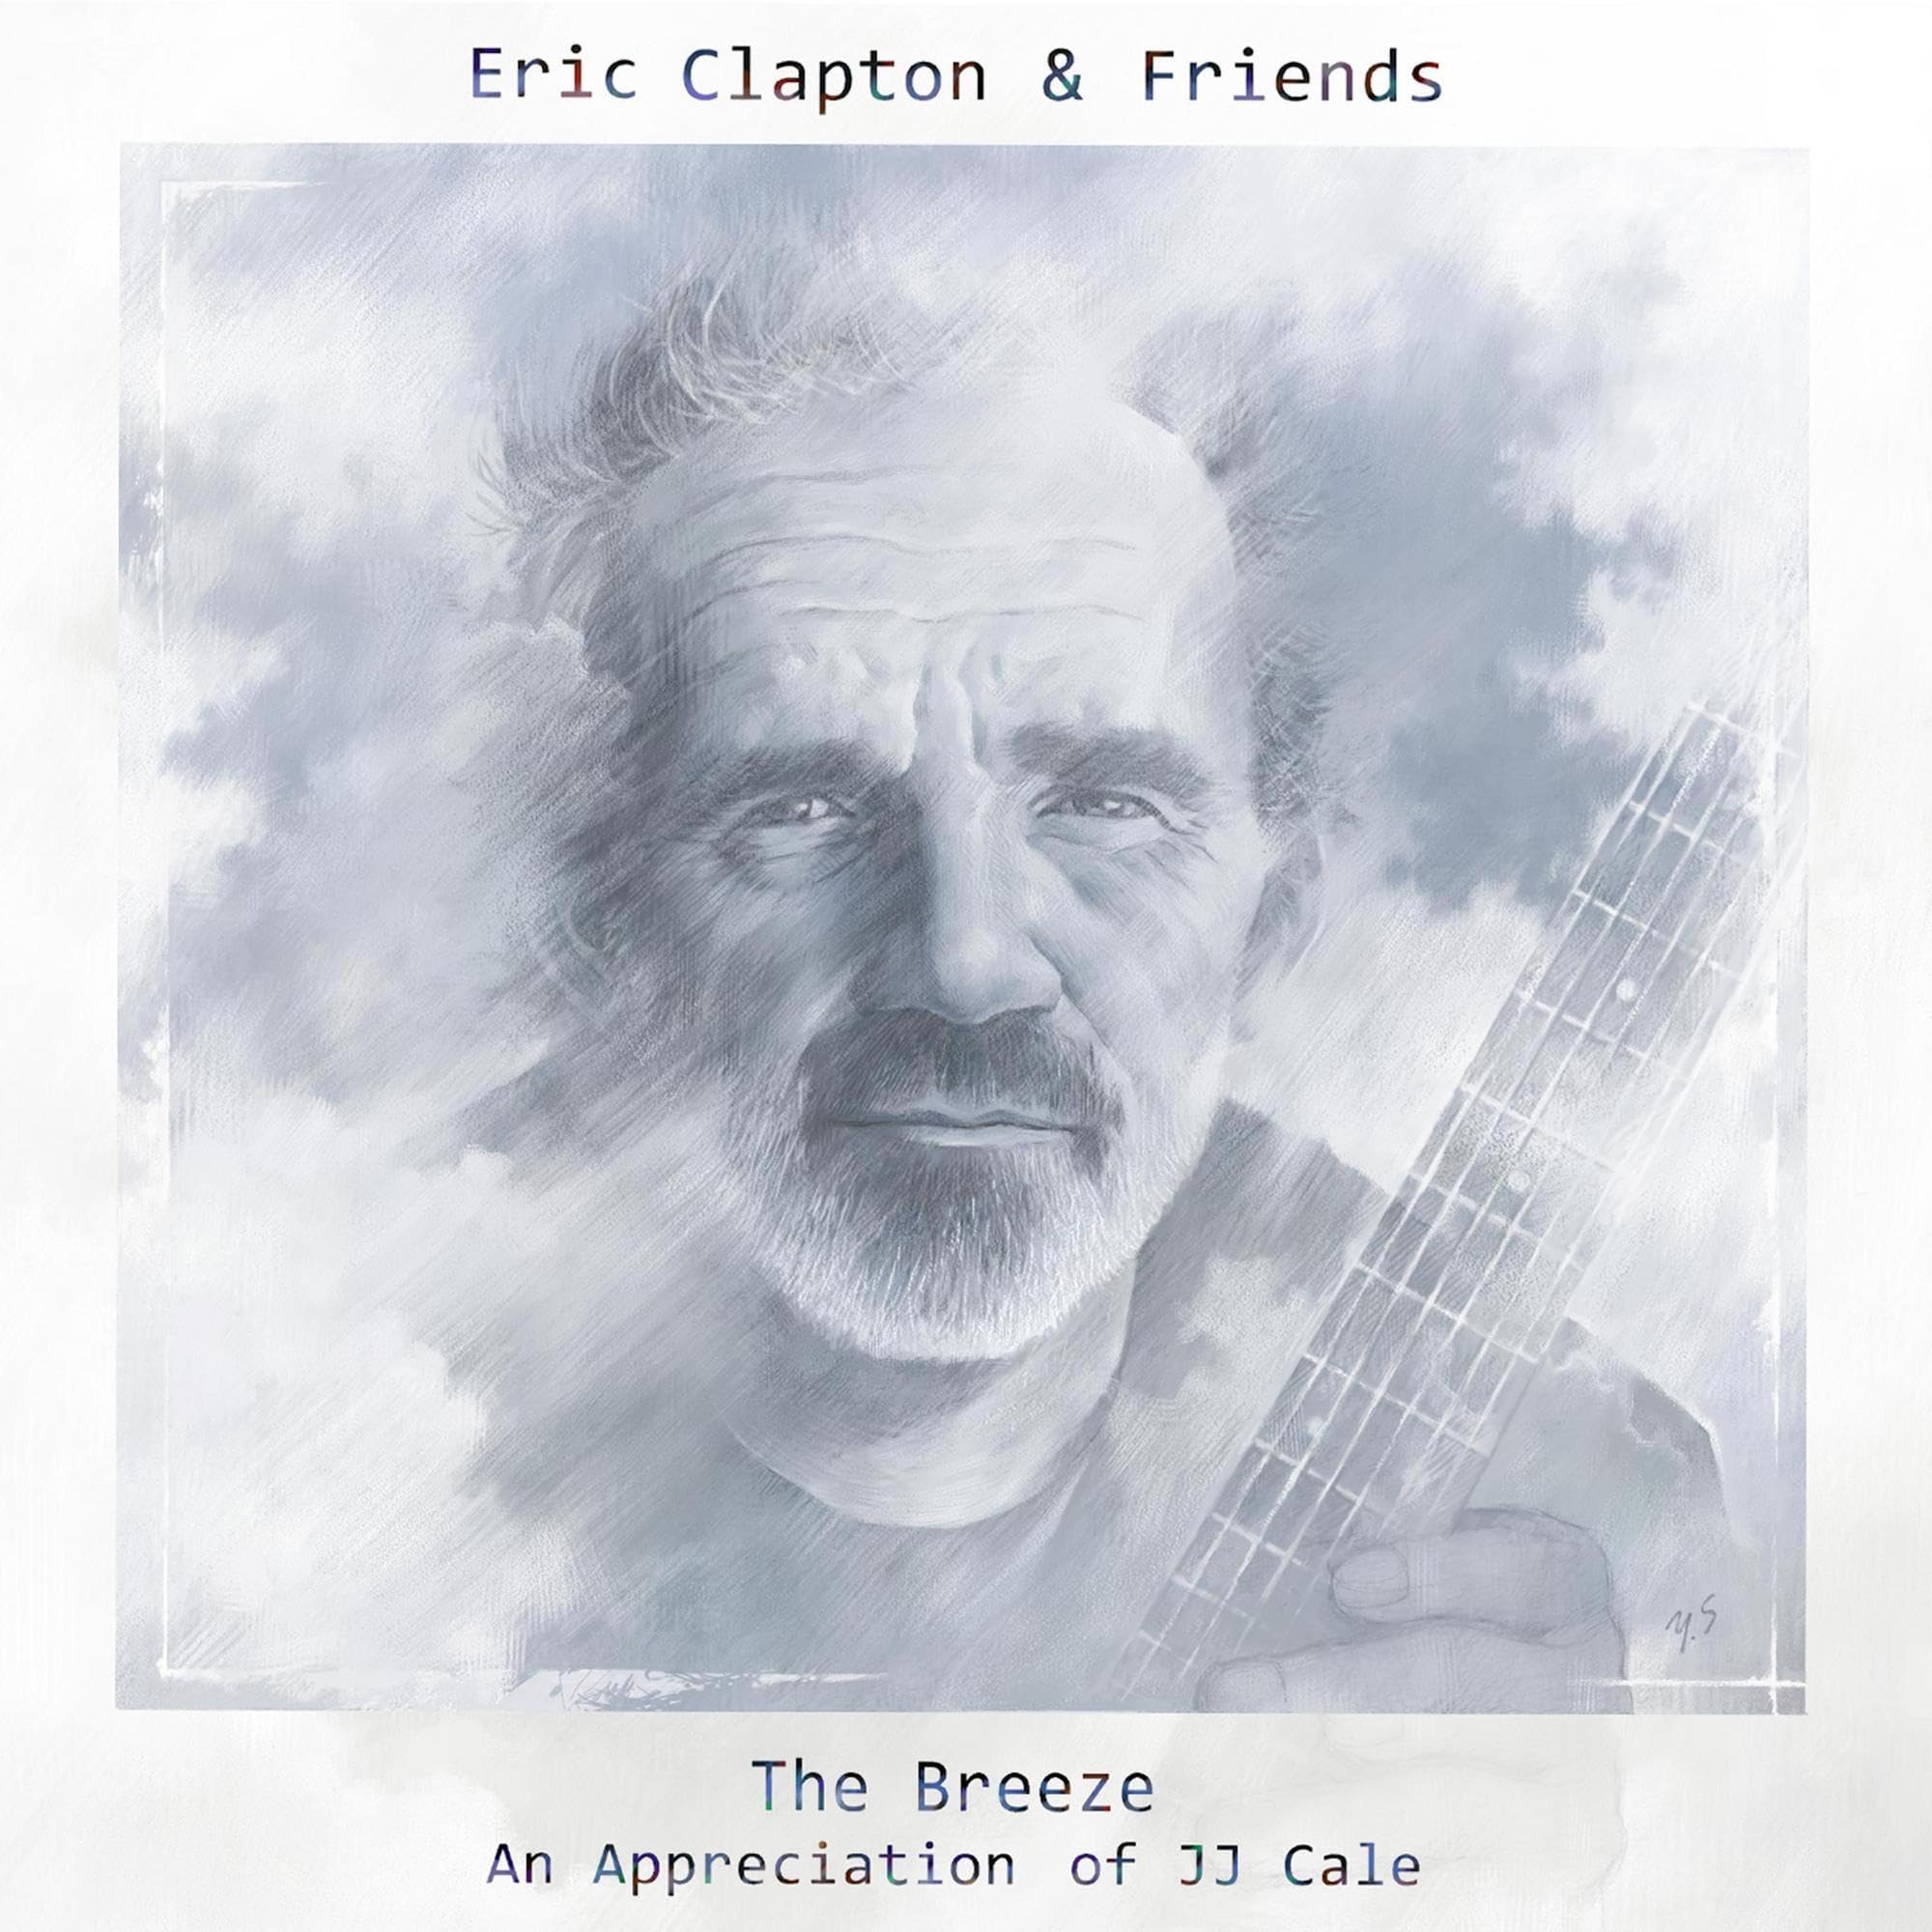 Eric Clapton & Friends: The Breeze (An Appreciation of J.J. Cale) on MovieShack